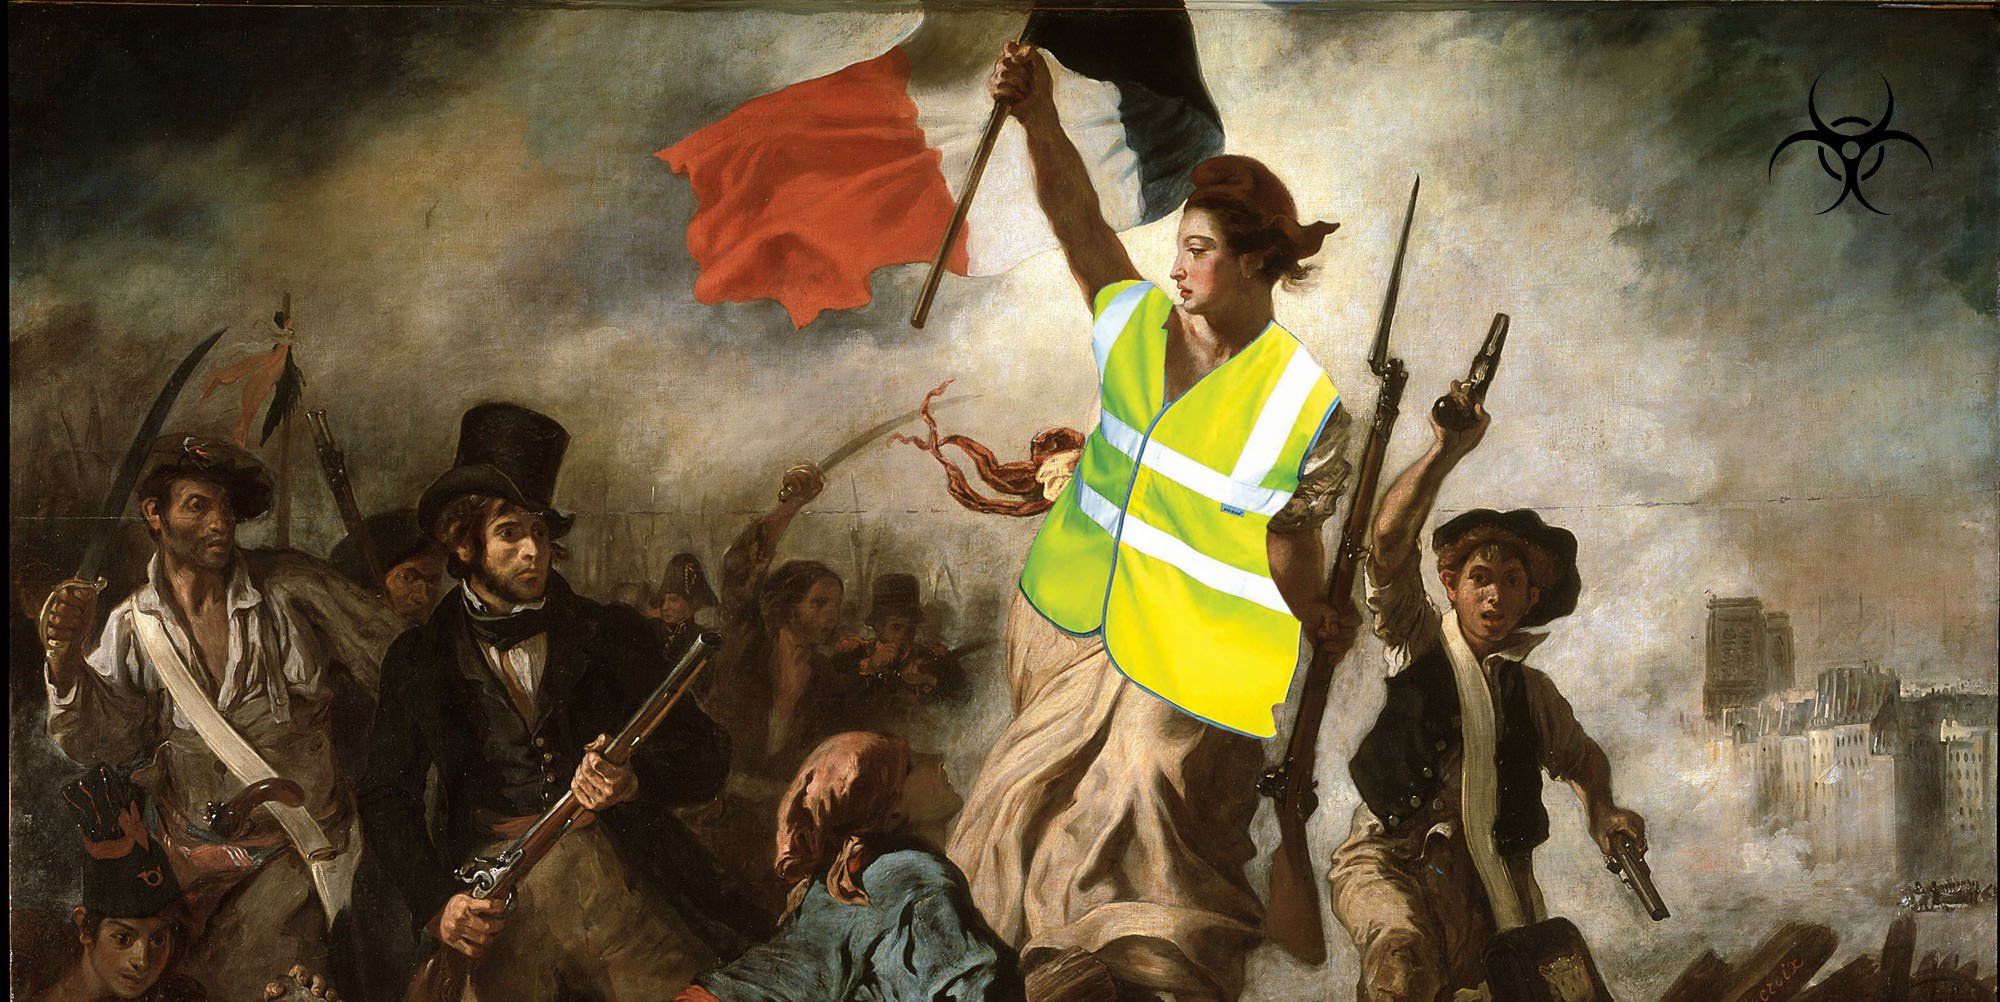 The Delacroix painting “Liberty Leading the People” altered so that Liberty is wearing a yellow vest.